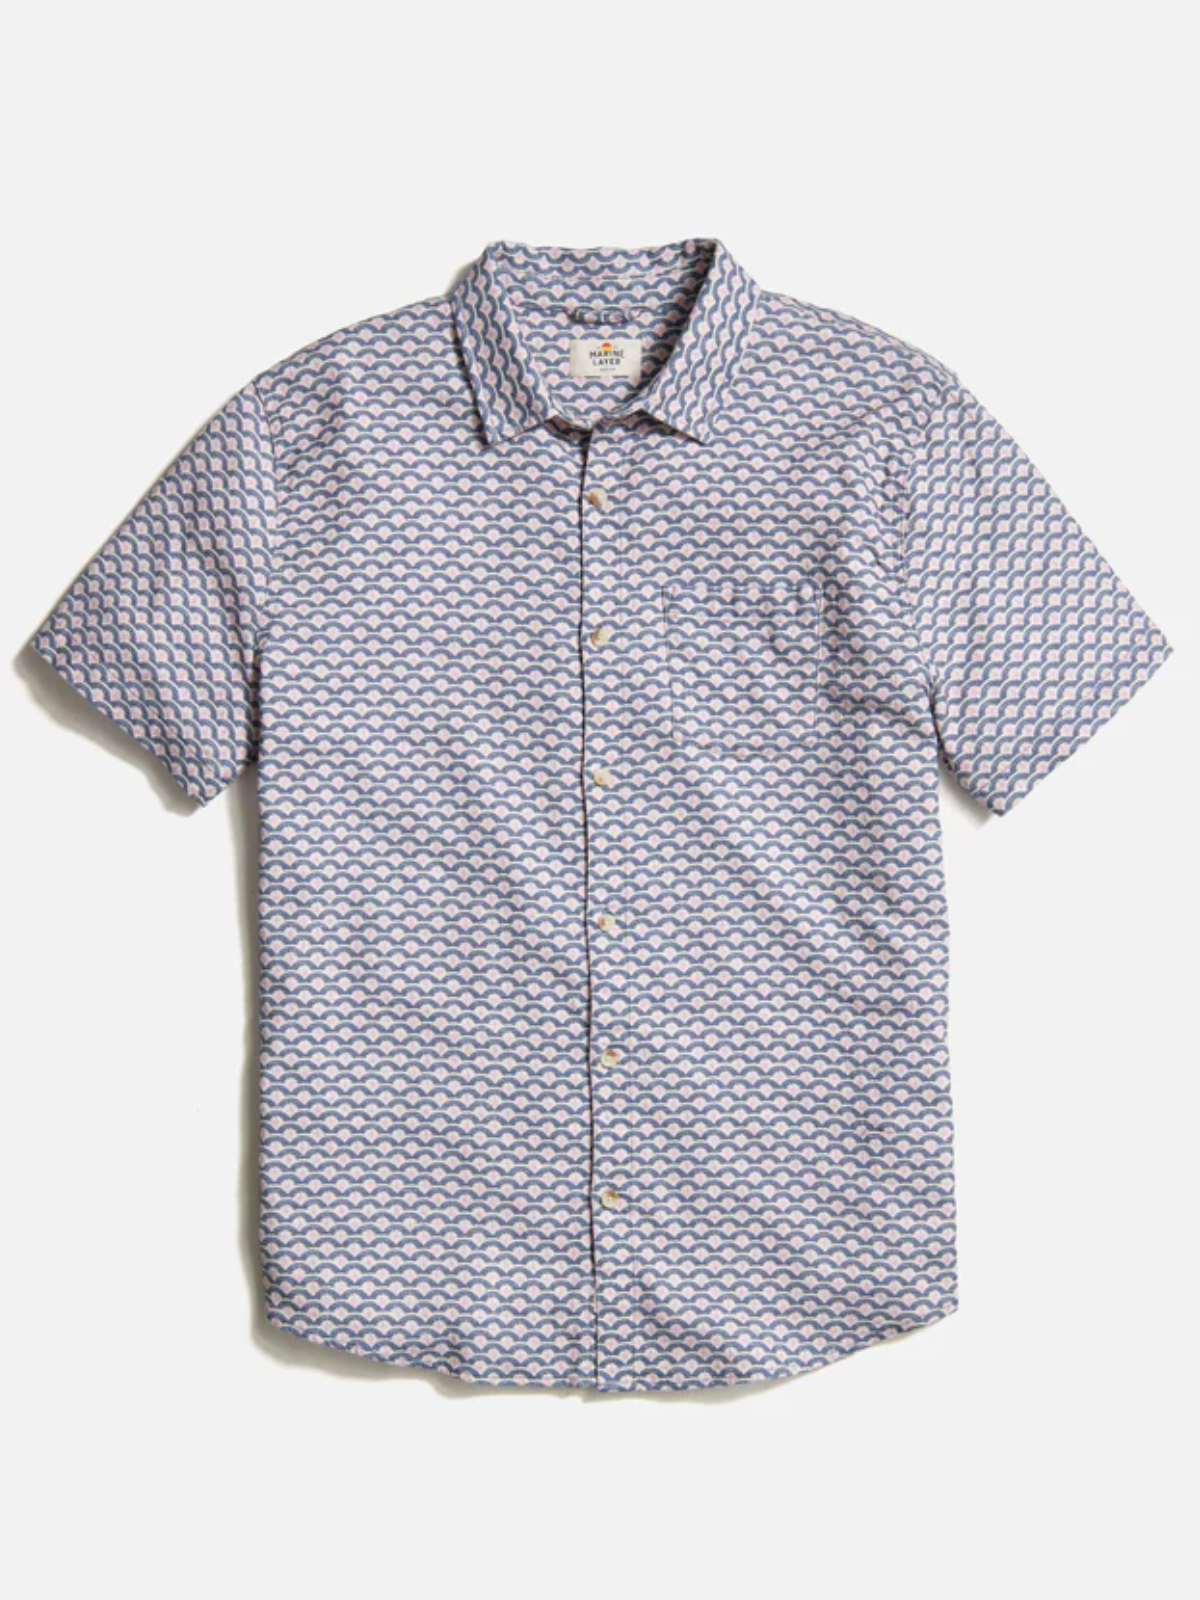 marine layer classic stretch selvage shirt ss short sleeve button up japanese wave print blue violet pink purple white kempt athens ga georgia men's clothing store